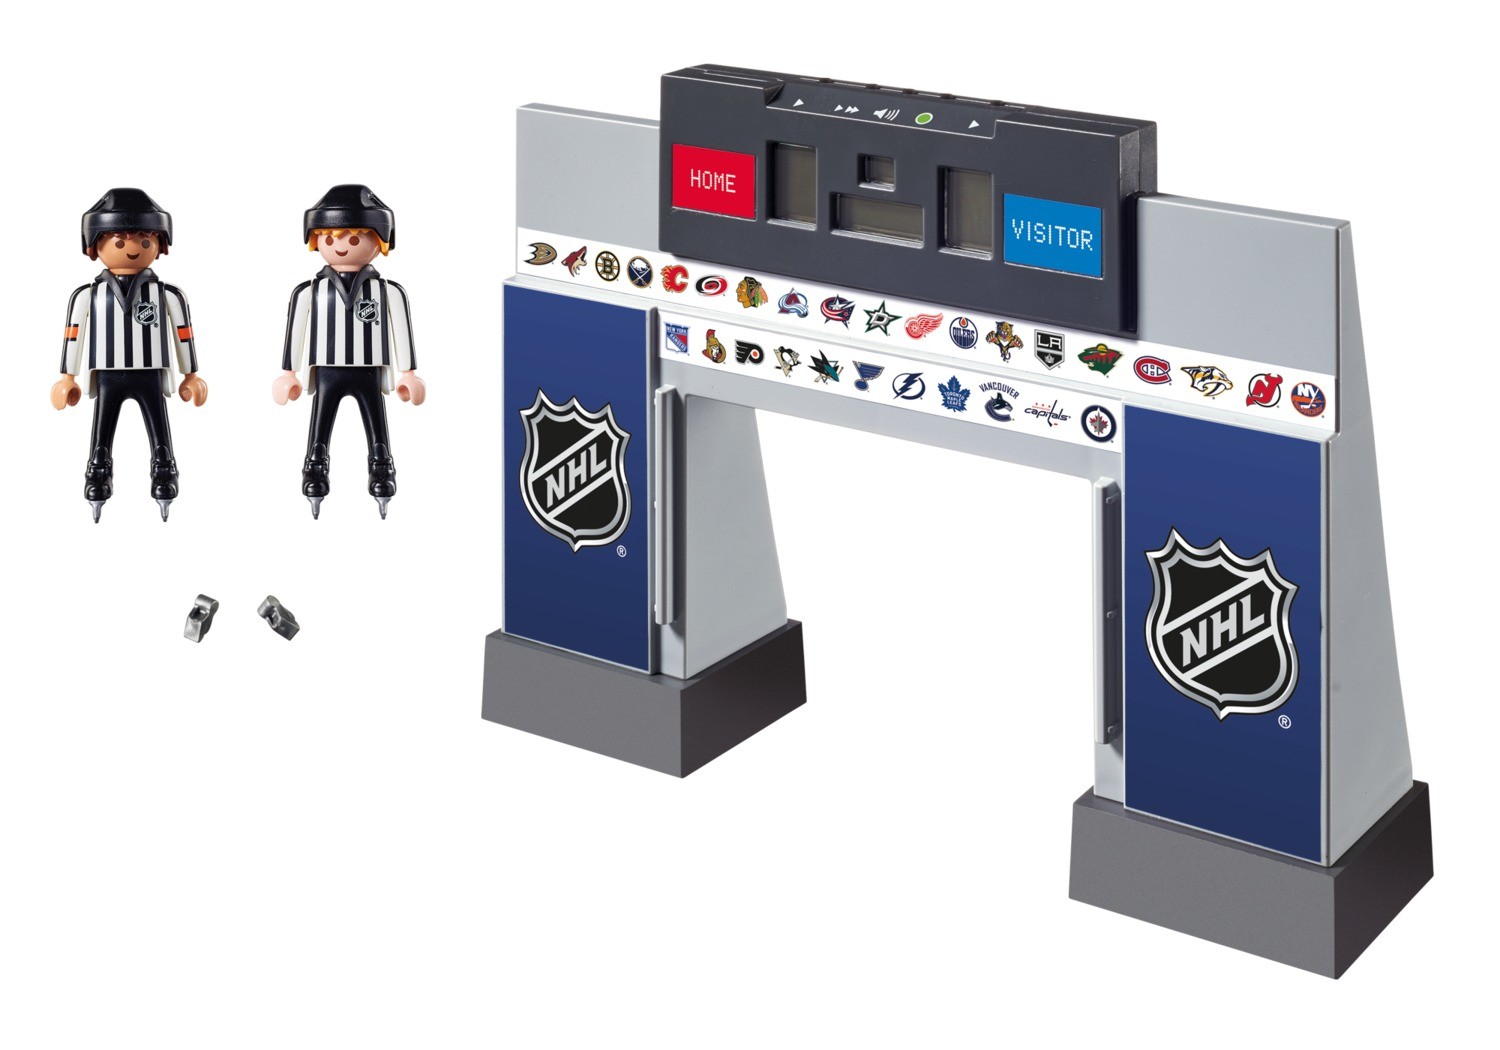 Playmobil Hockey Sur Glace Nhl Nhl Score Clock With 2 Referees 9016 002 